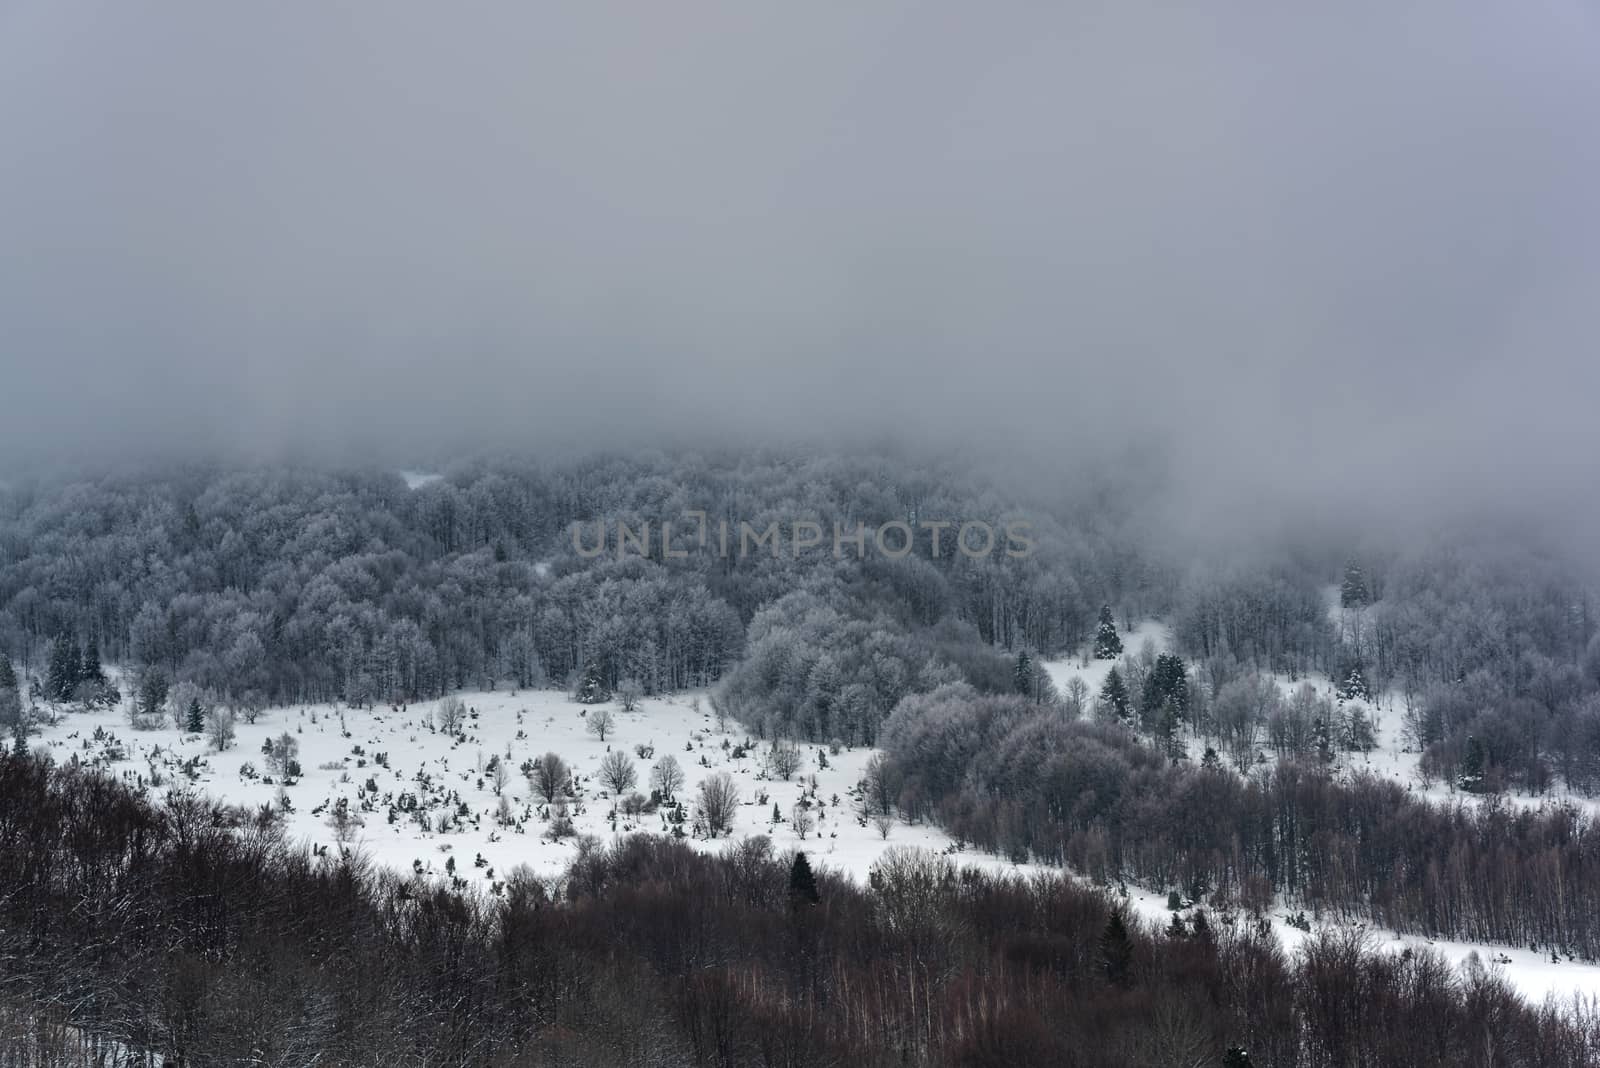 Moody and Dramatic Image of Snow Covered Woodlands at Hill in Bieszczady, Poland.